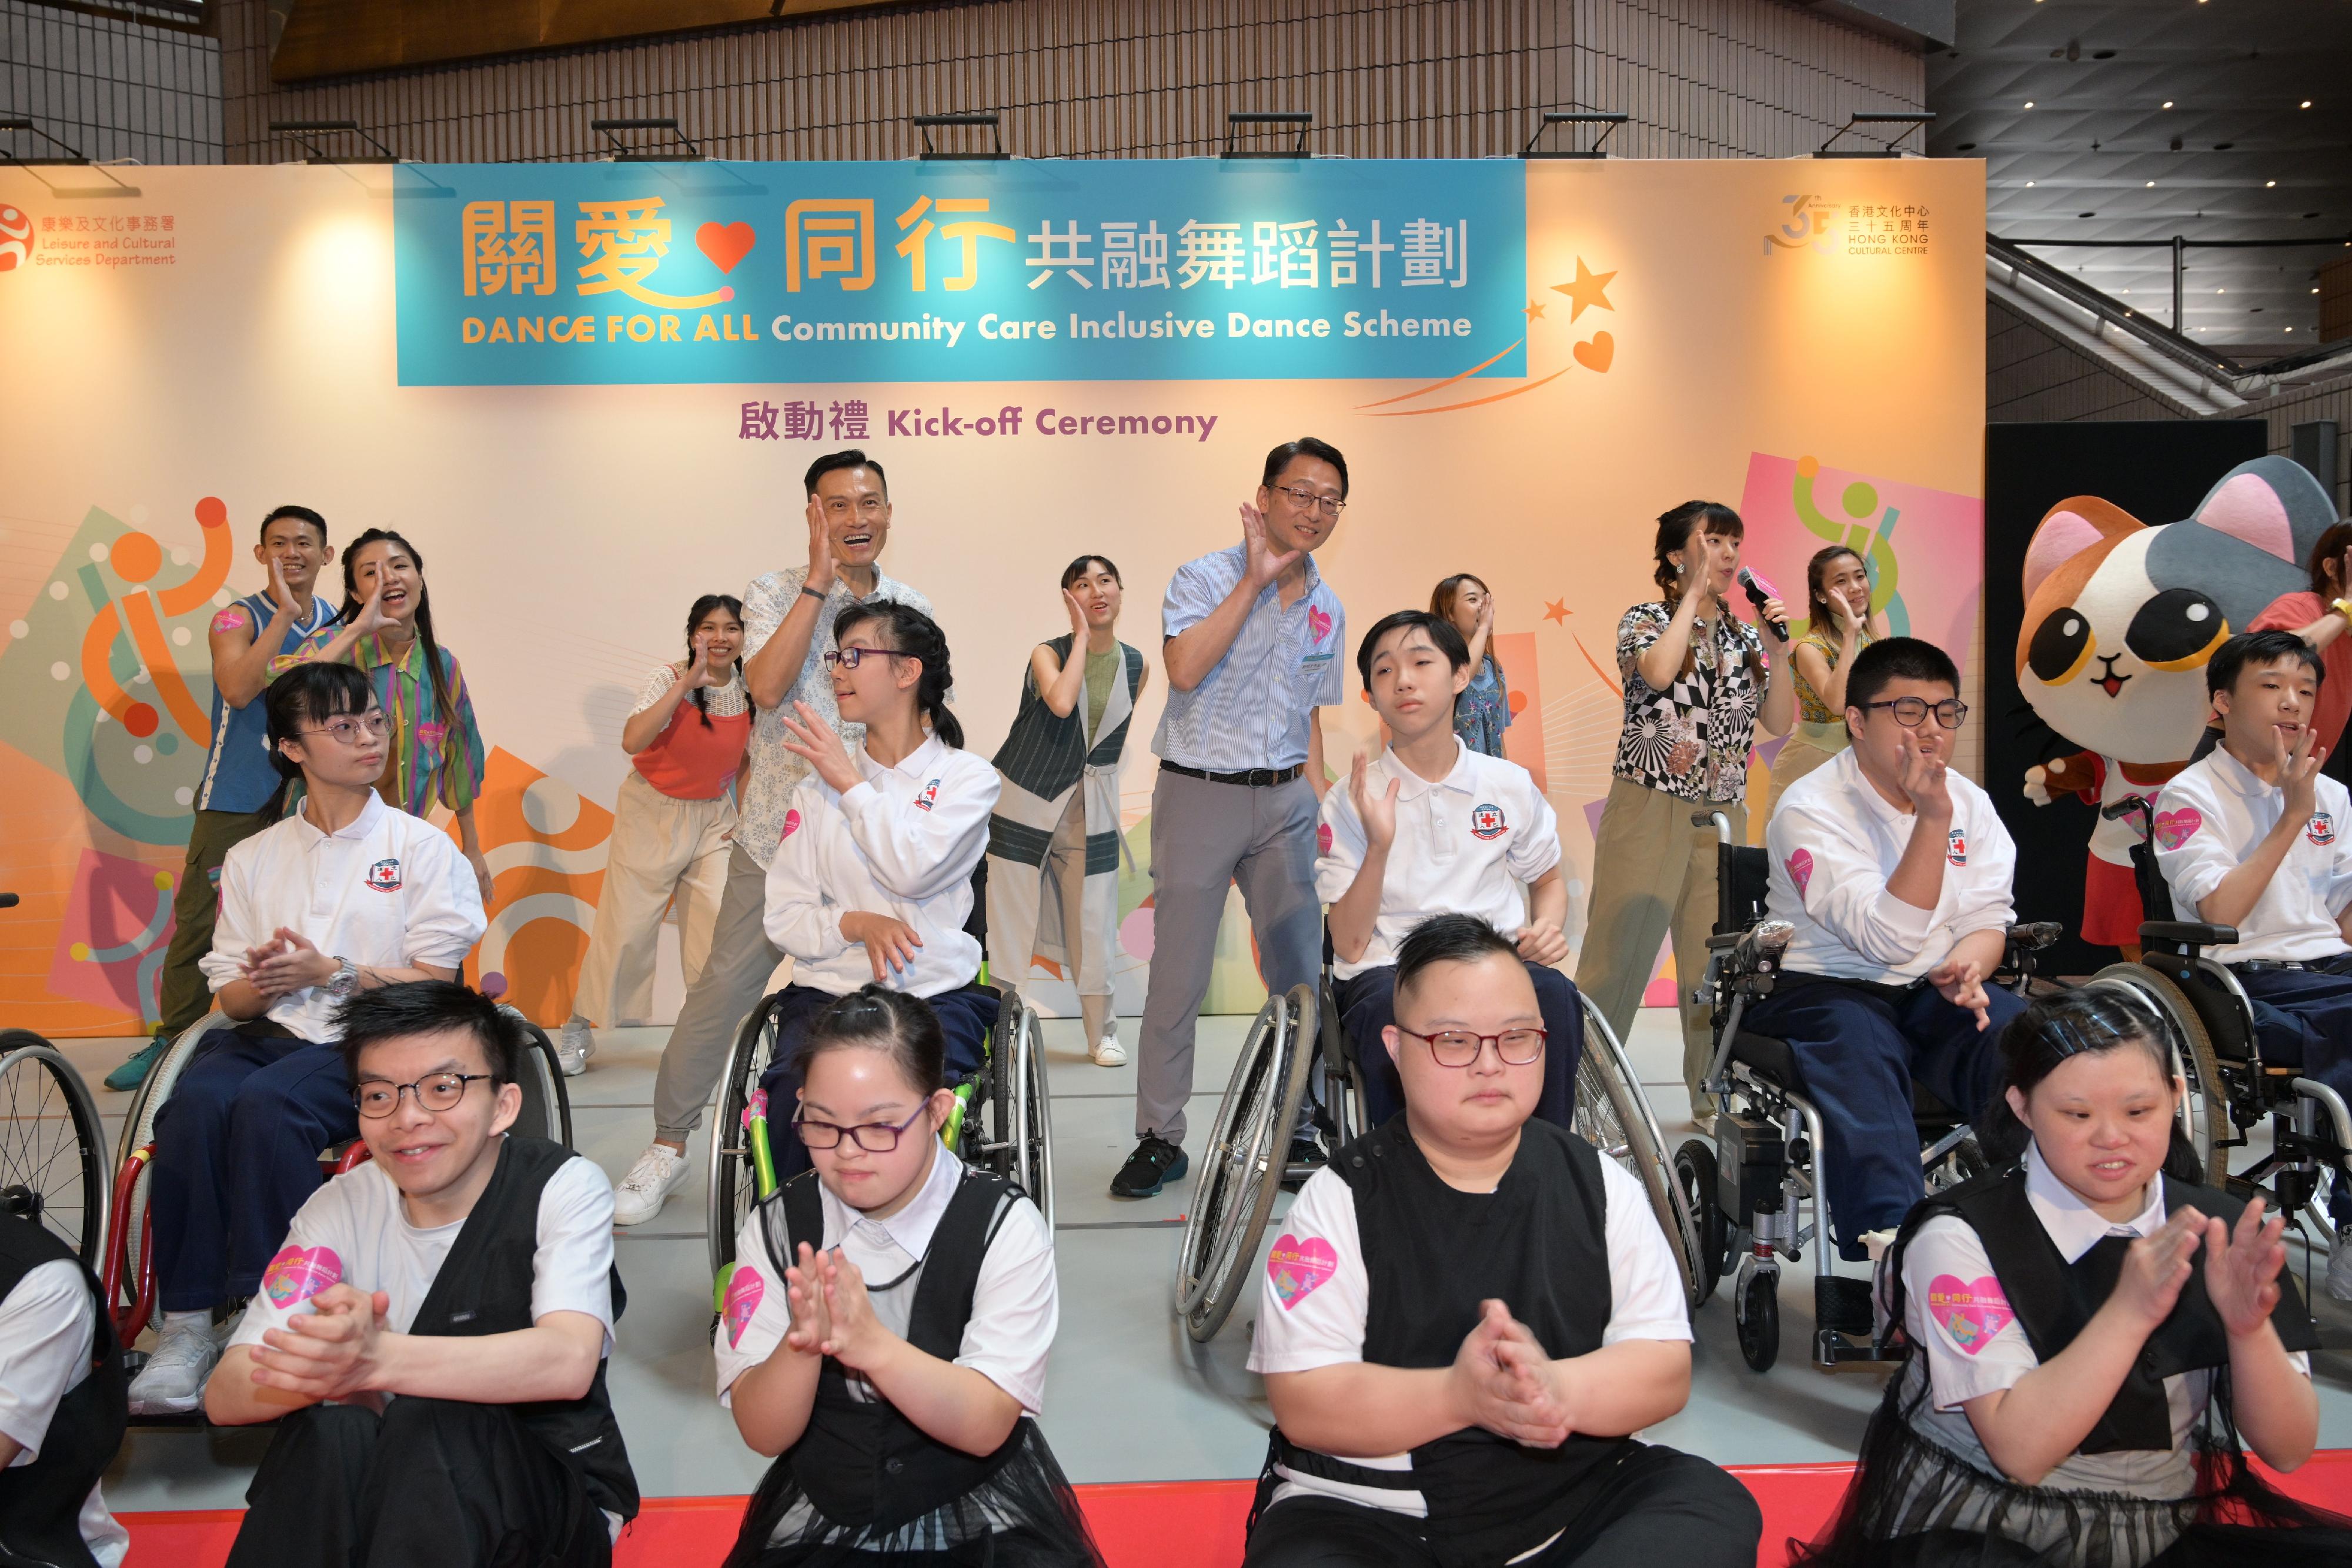 The "Dance for All" Community Care Inclusive Dance Scheme, organised by the Leisure and Cultural Services Department, was launched today (May 5). Based at the Hong Kong Cultural Centre, the 15-month scheme promotes social inclusion by serving as a platform for people with different abilities to dance together. Photo shows officiating guests of the kick-off ceremony dancing with the performers.